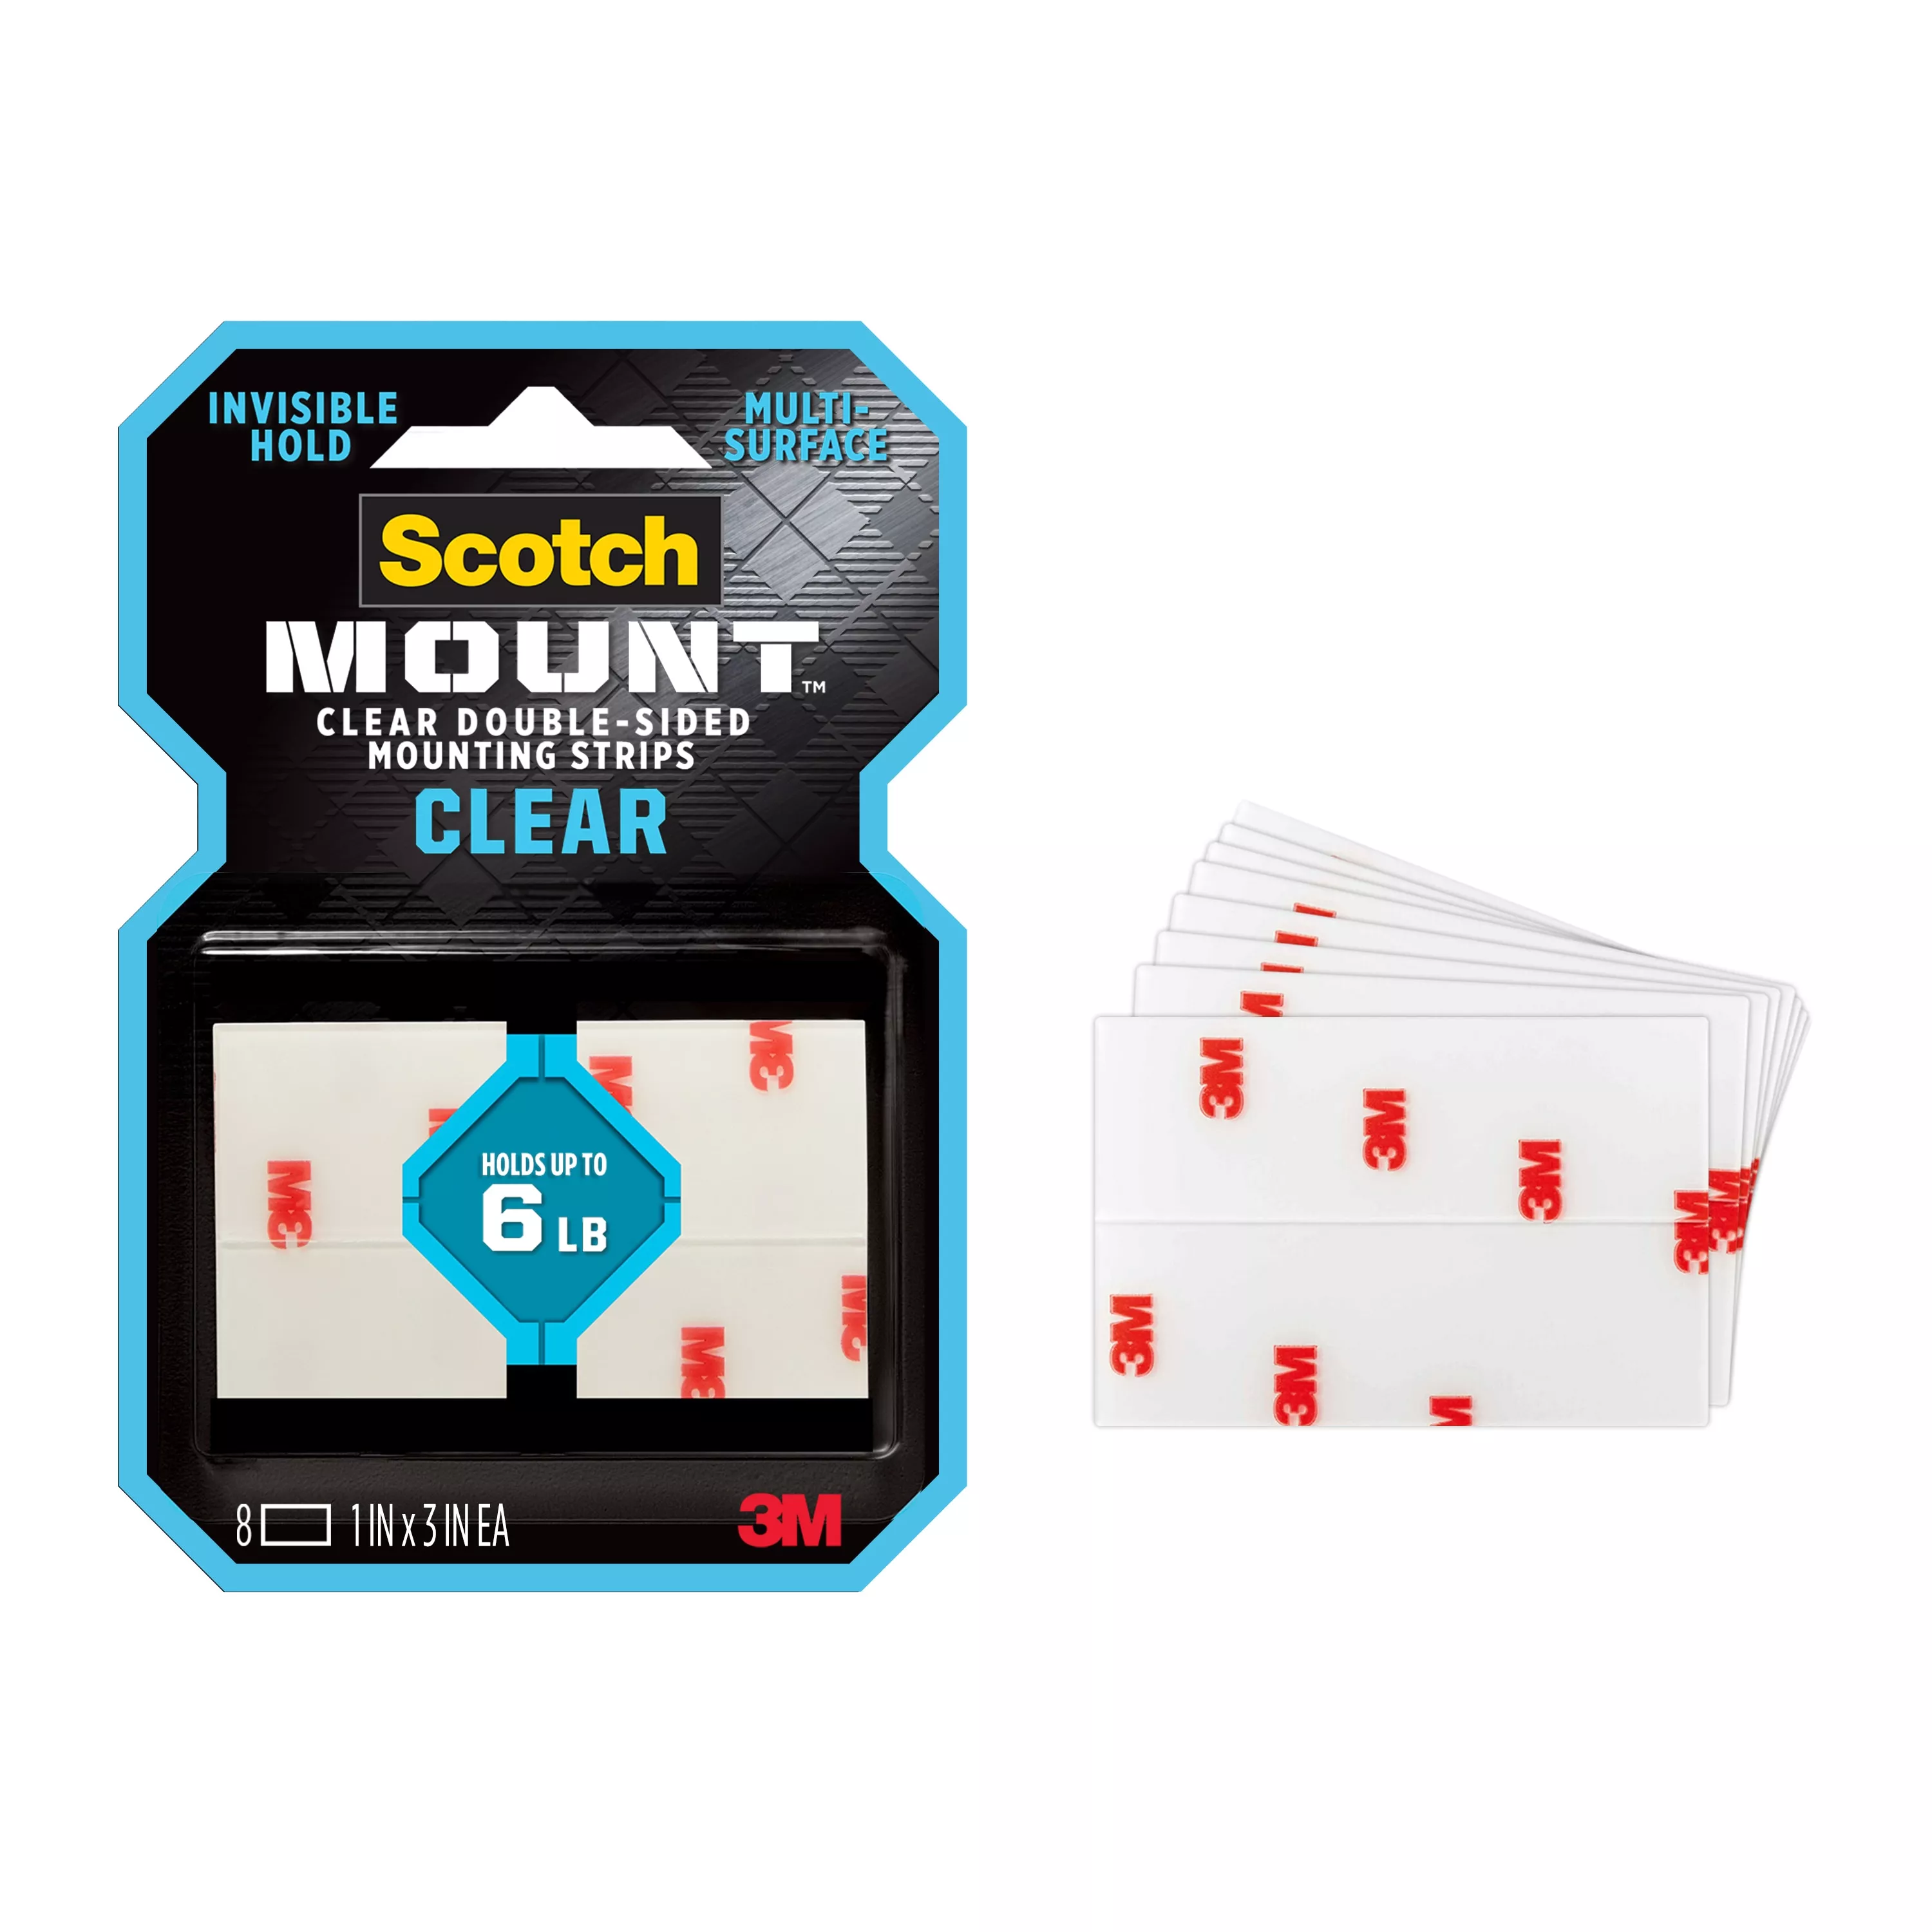 Scotch-Mount™ Clear Double-Sided Mounting Strips 410H-ST, 1 in x 3 in (2.54 cm x 7.62 cm), 8 Strips